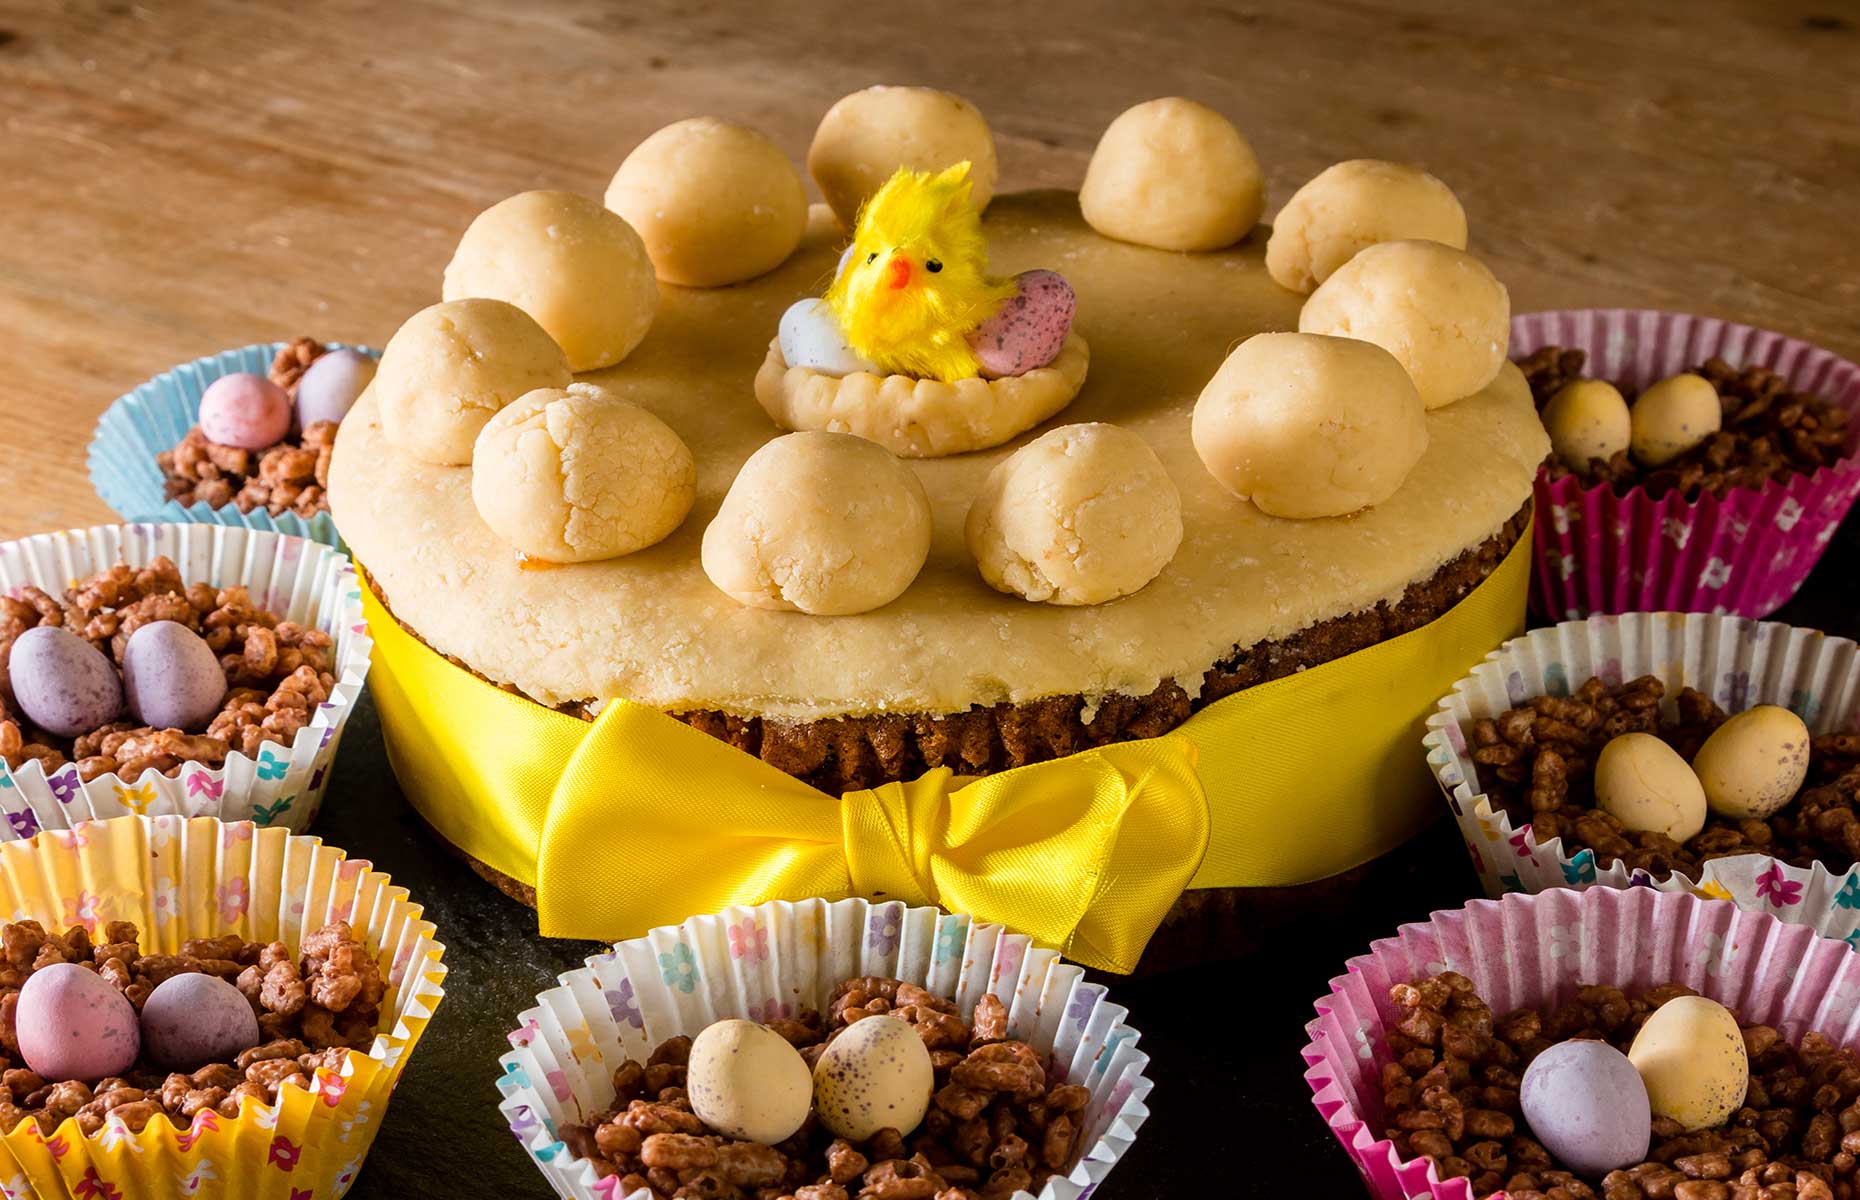 Simnel cake with Easter decorations (images: ClimbWhenReady/Shutterstock)